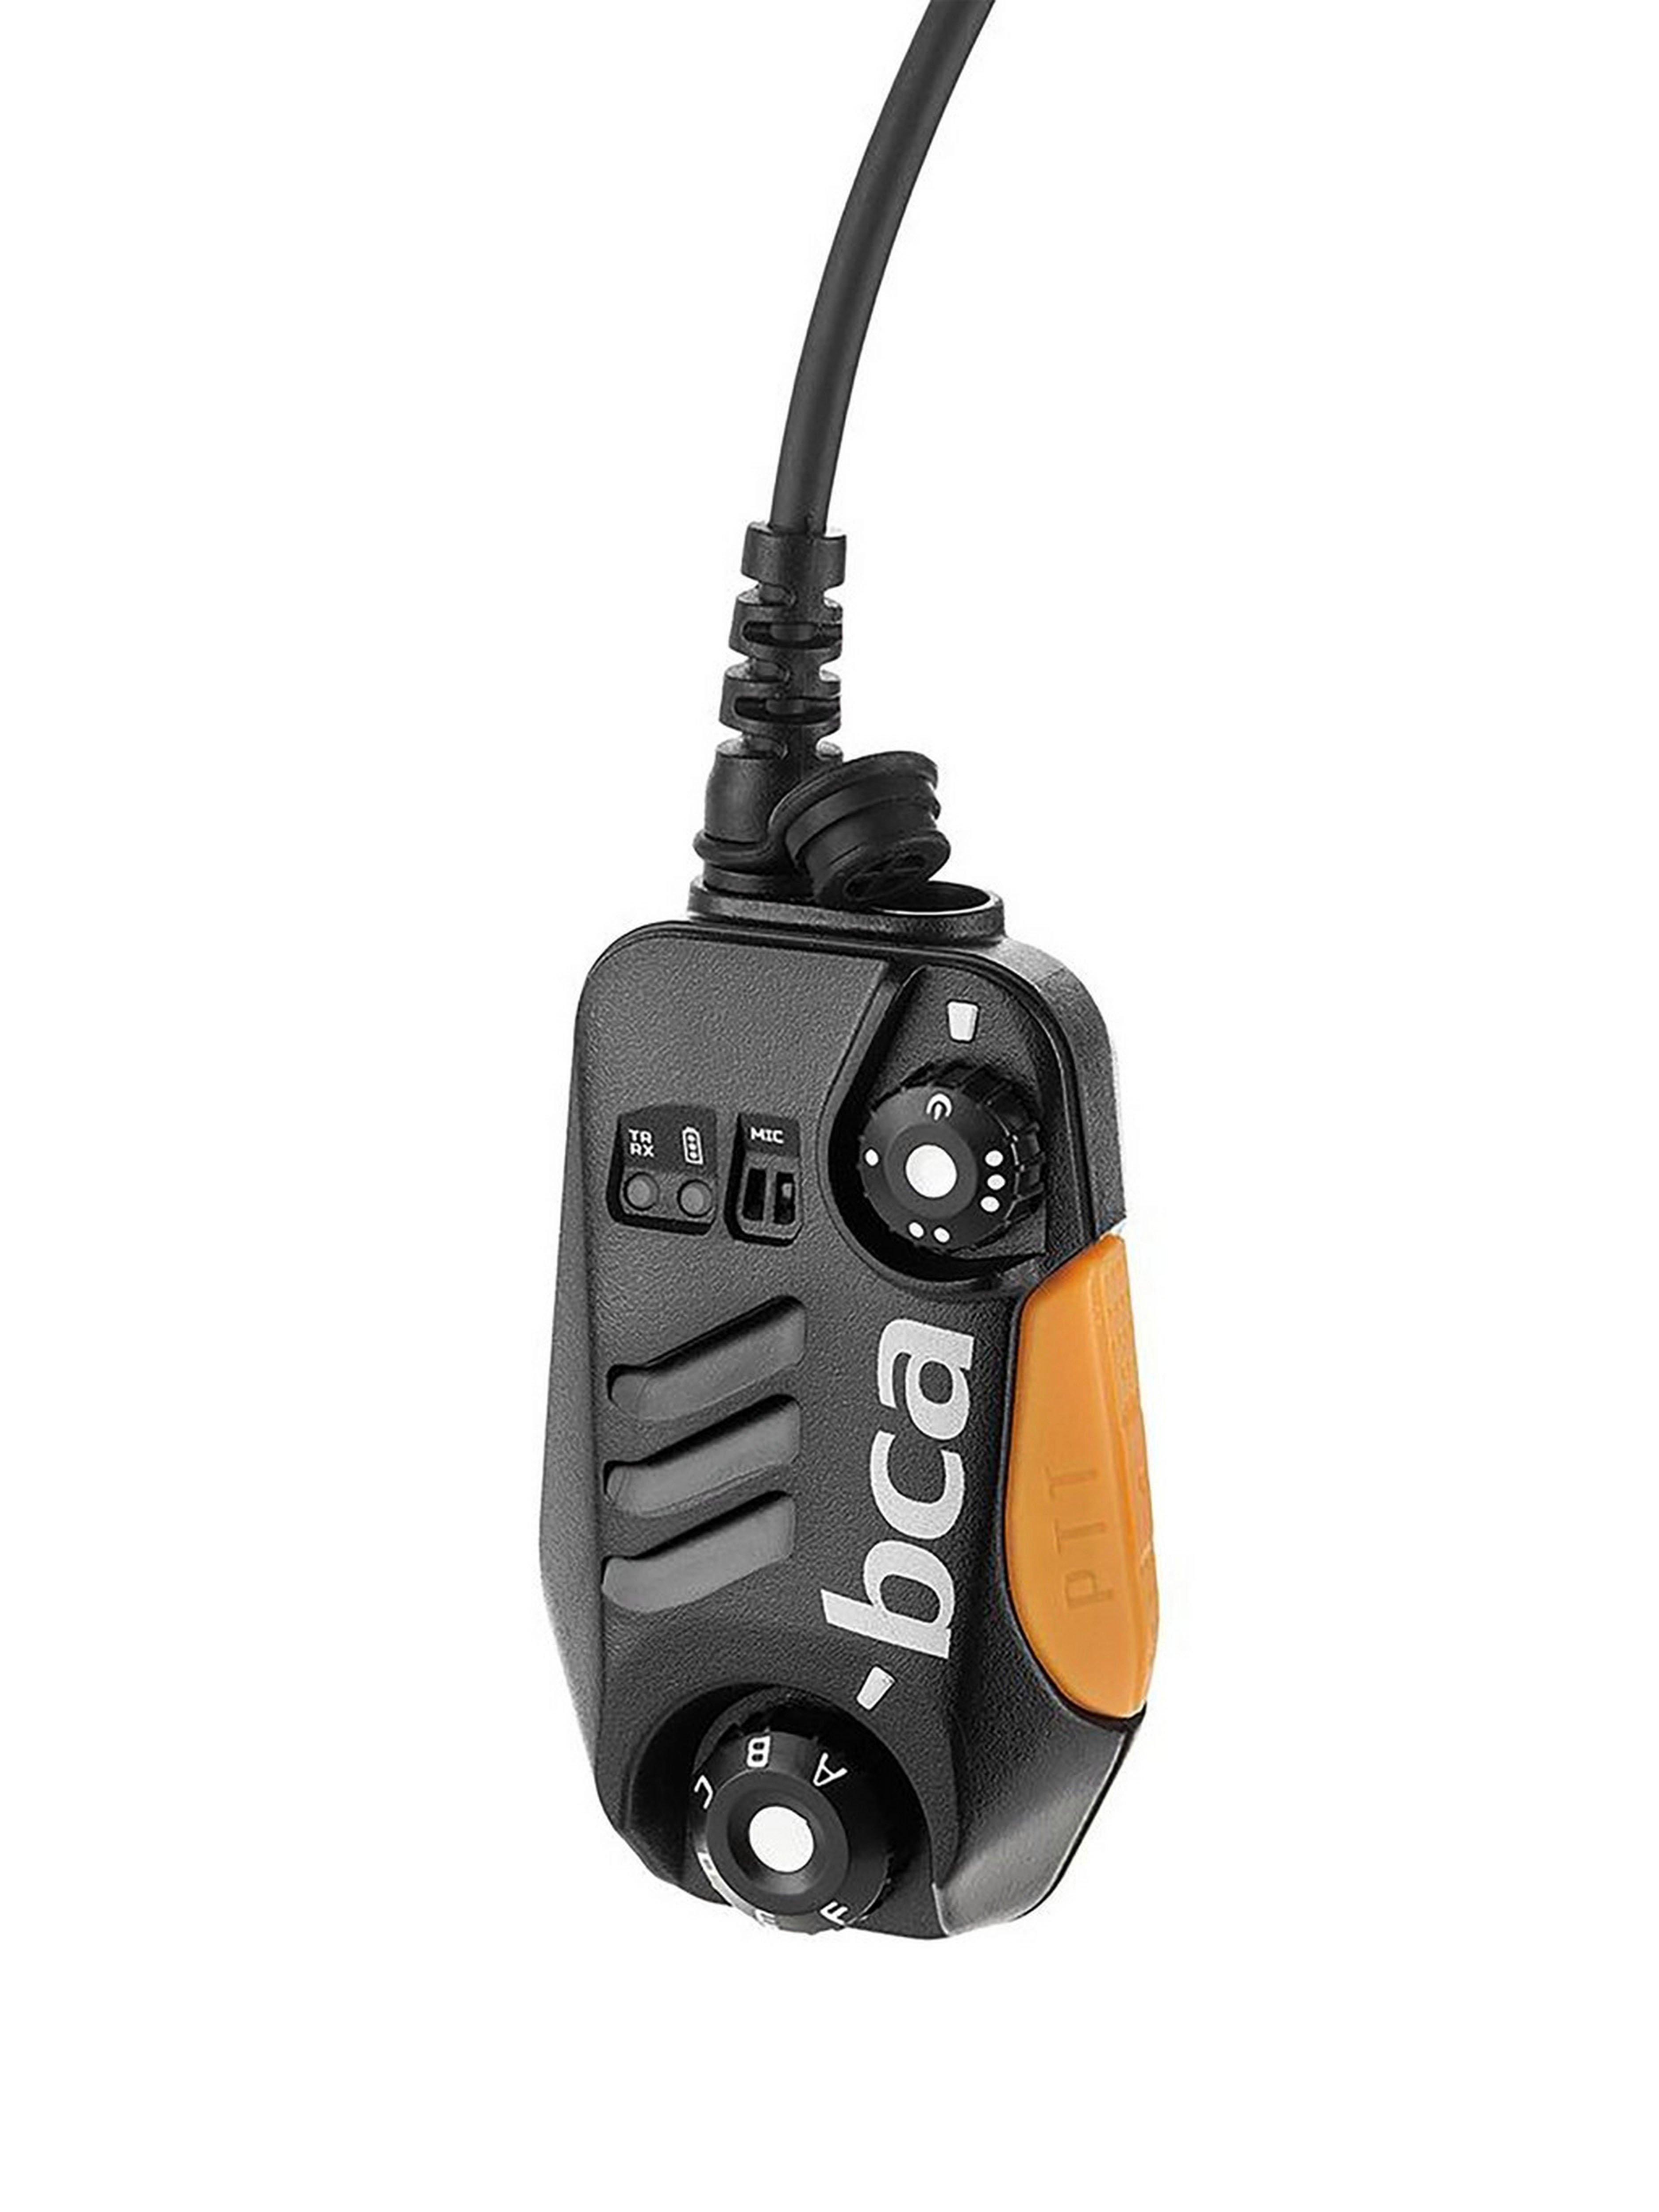 Backcountry Access BCA BC Link Group Communication Radio (Black 2.0, Pack) - 4